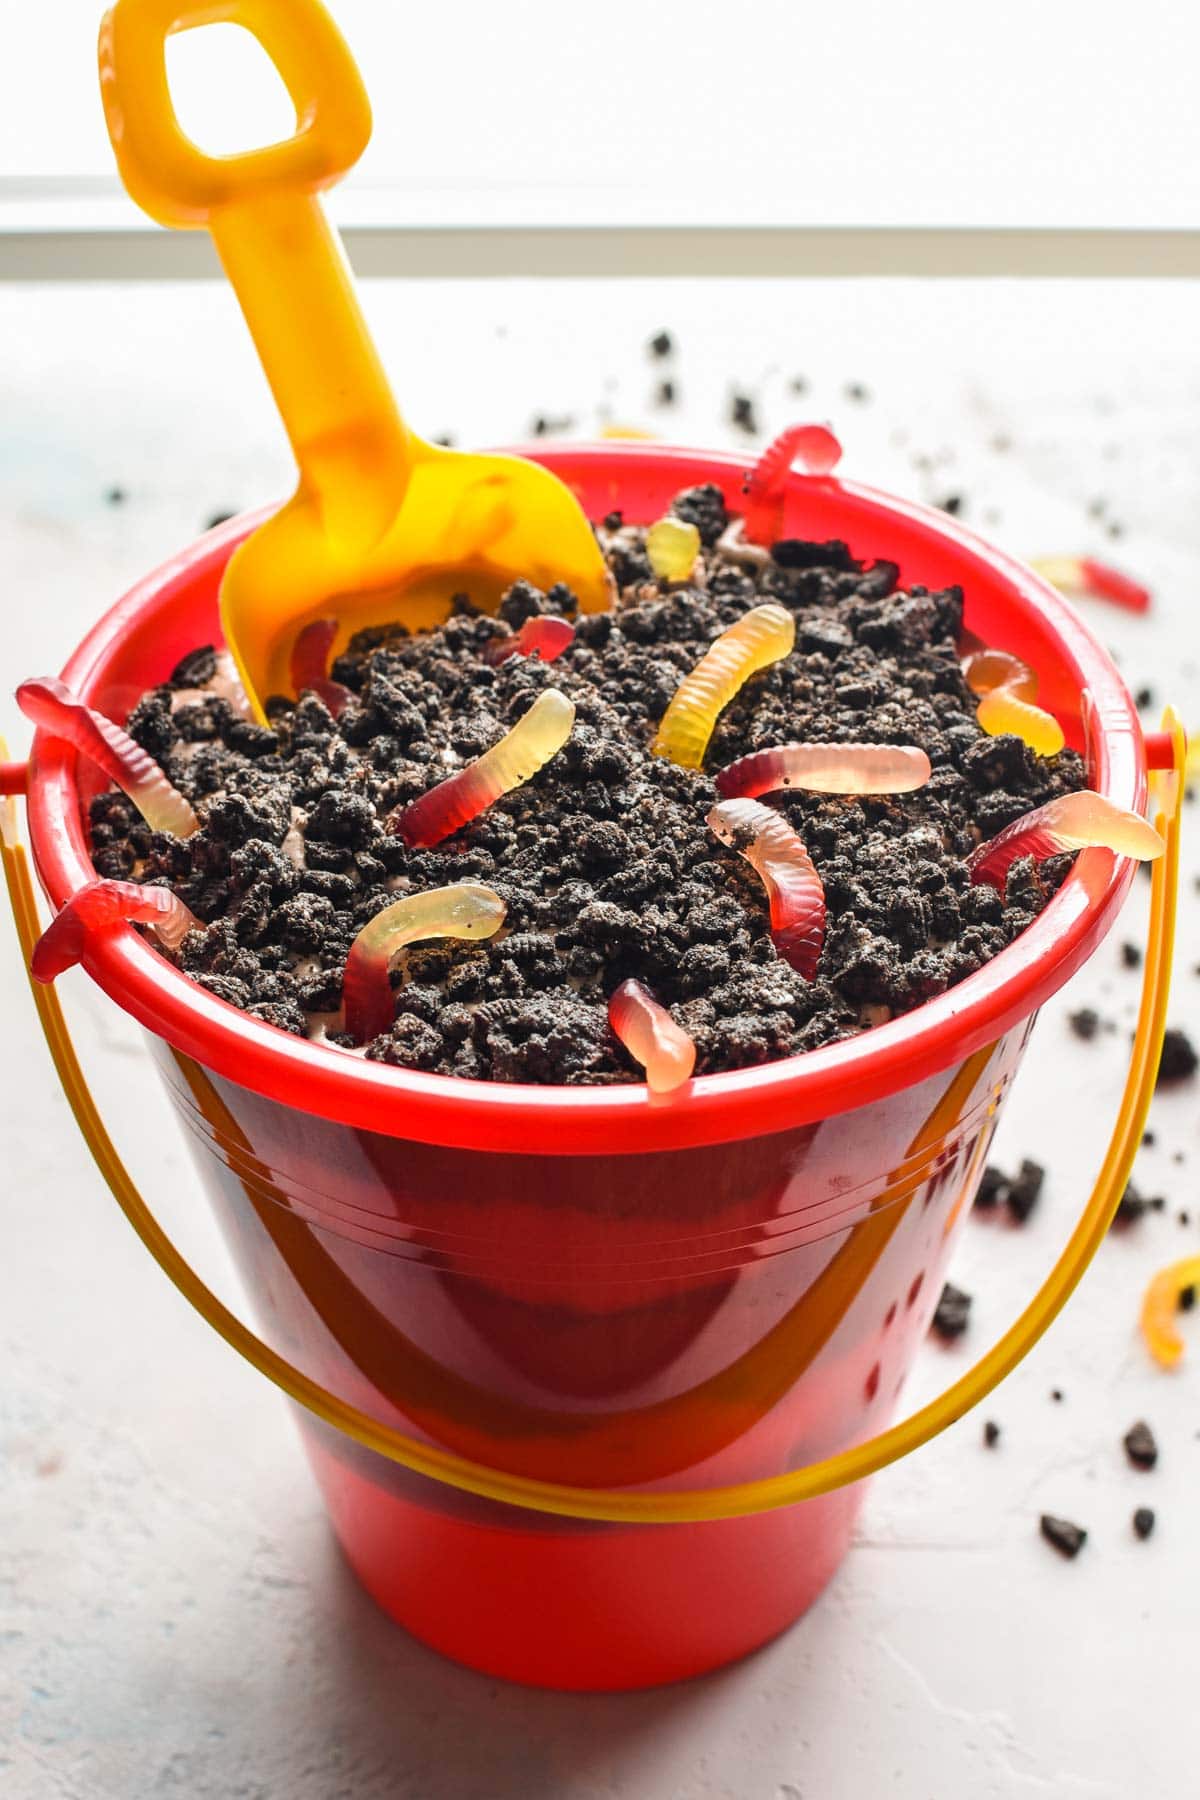 This Dirt Pudding recipe is perfect for family gathering and loved by kids and adults alike!